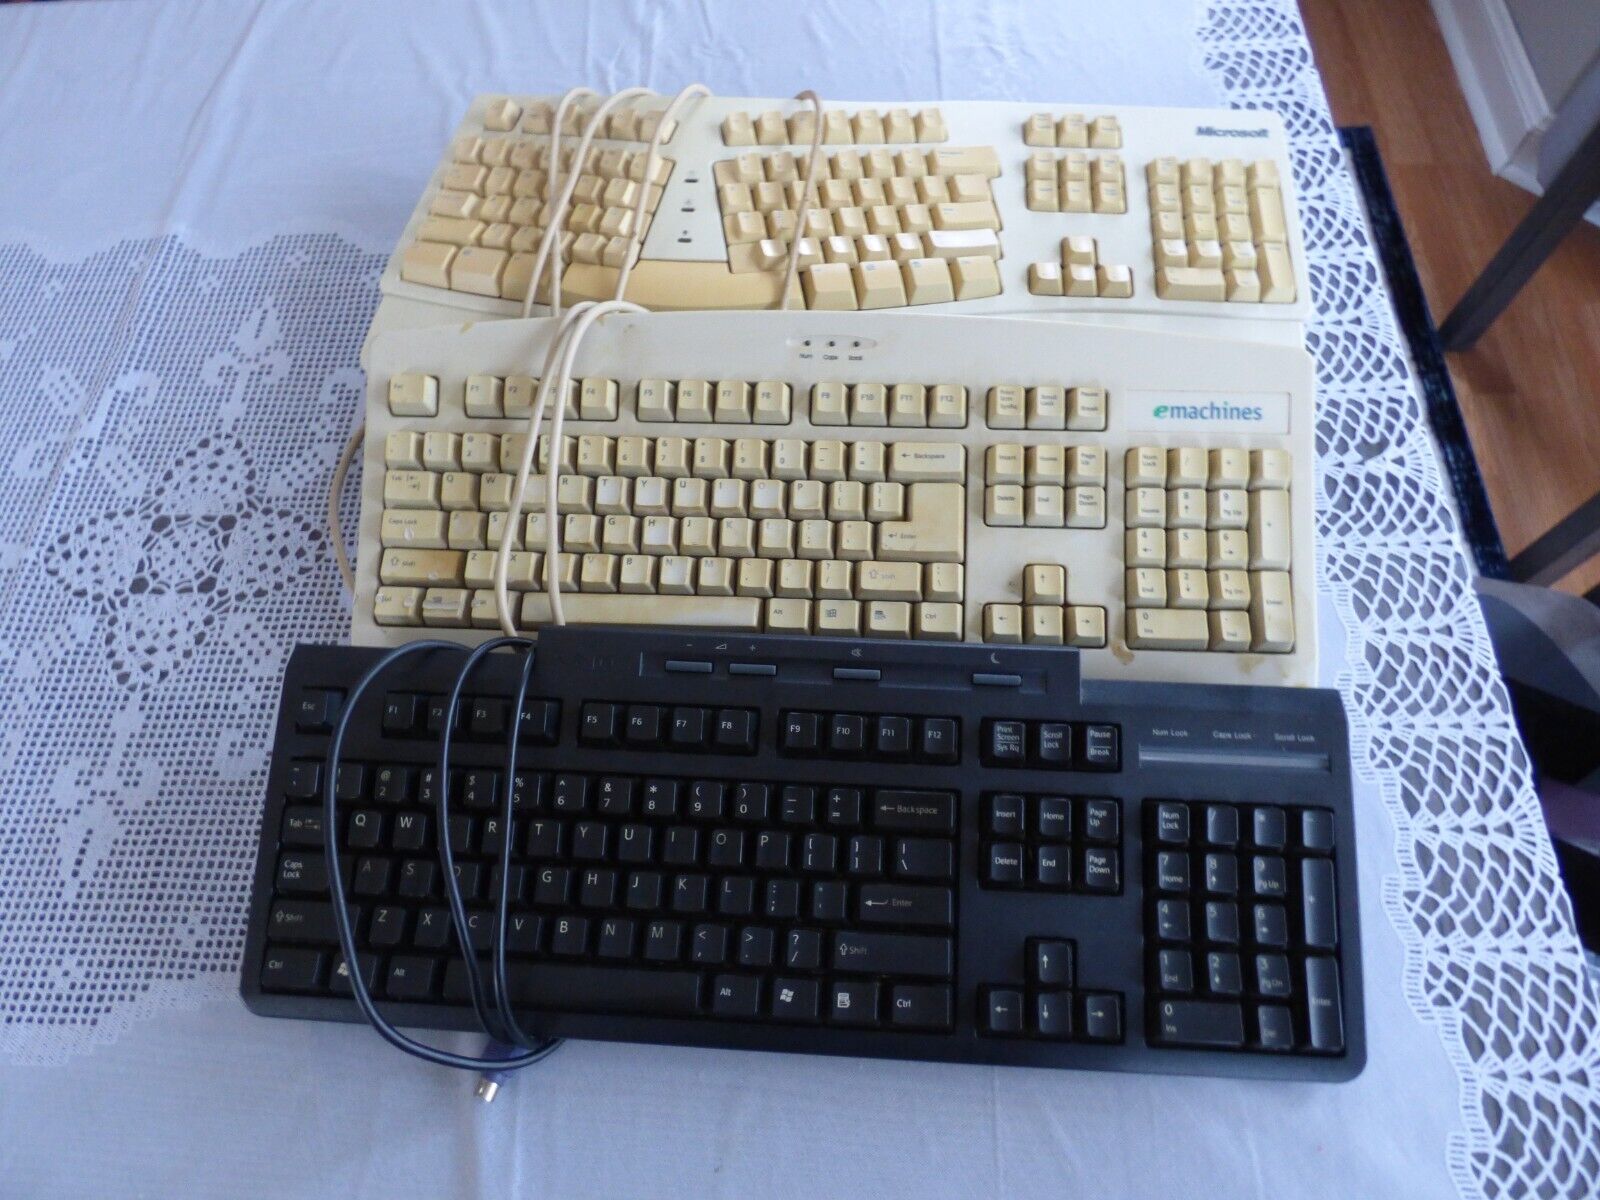 Keyboards 3 vintage lot as is condition e-Machine Microsoft Sony